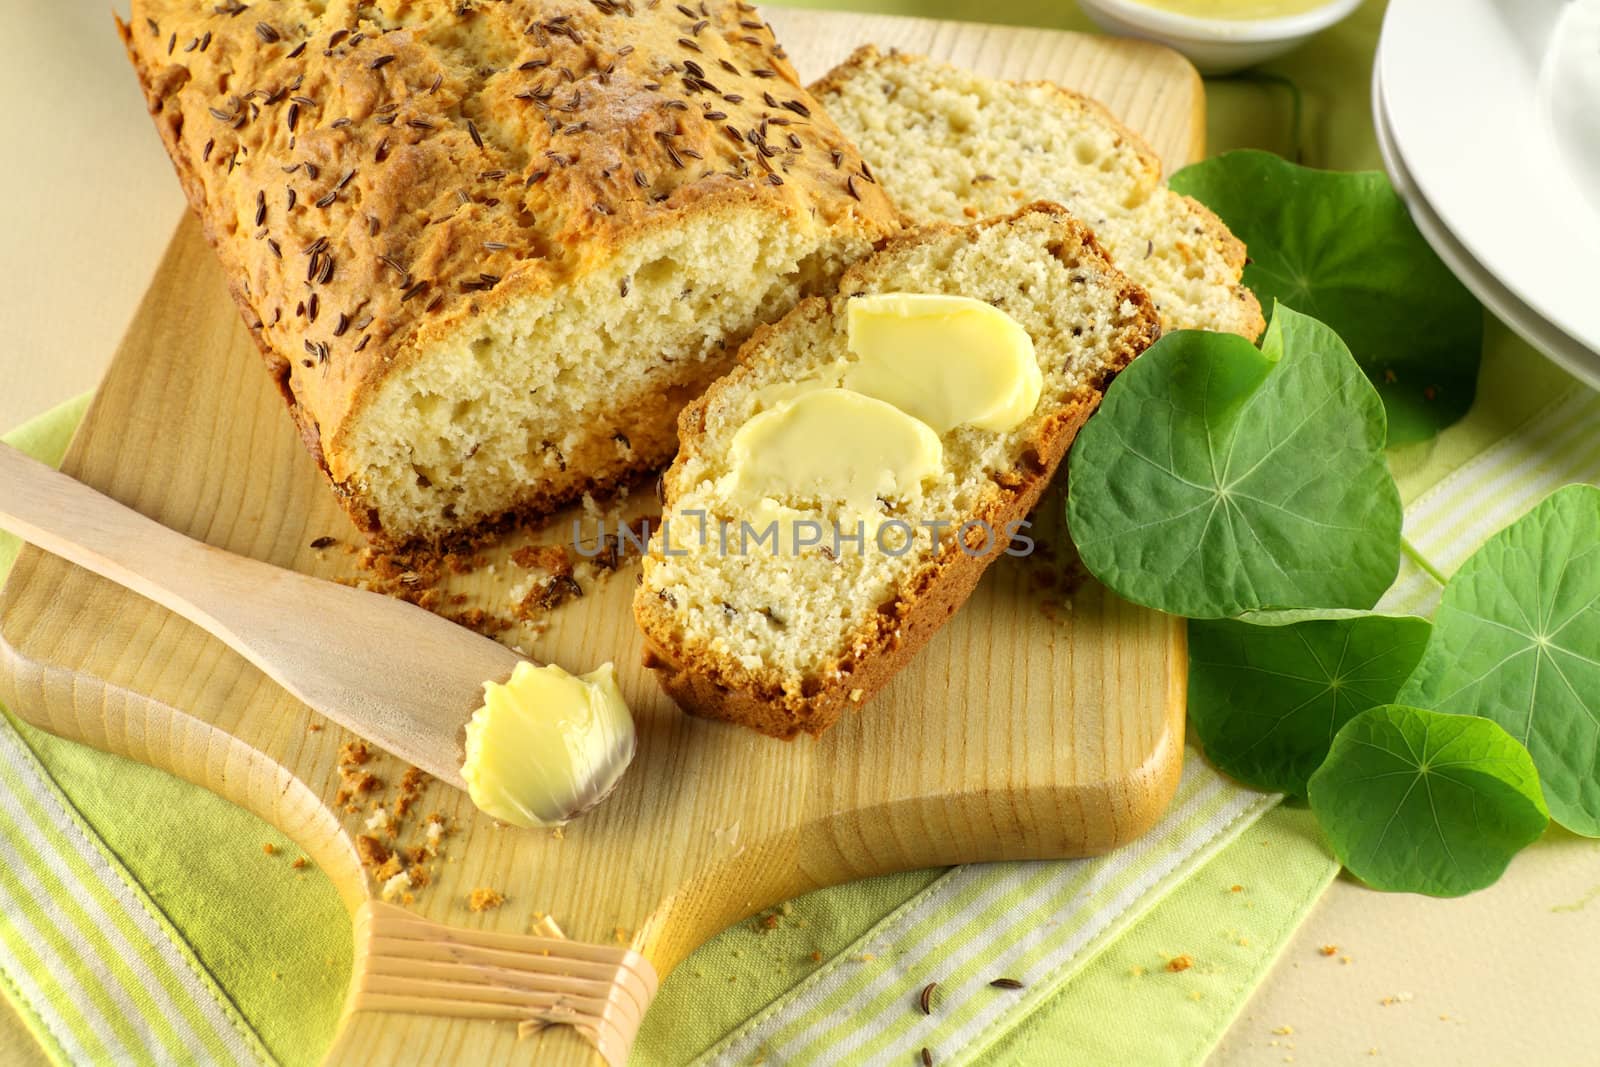 Delicious buttered slice of fresh caraway seed loaf ready to serve.